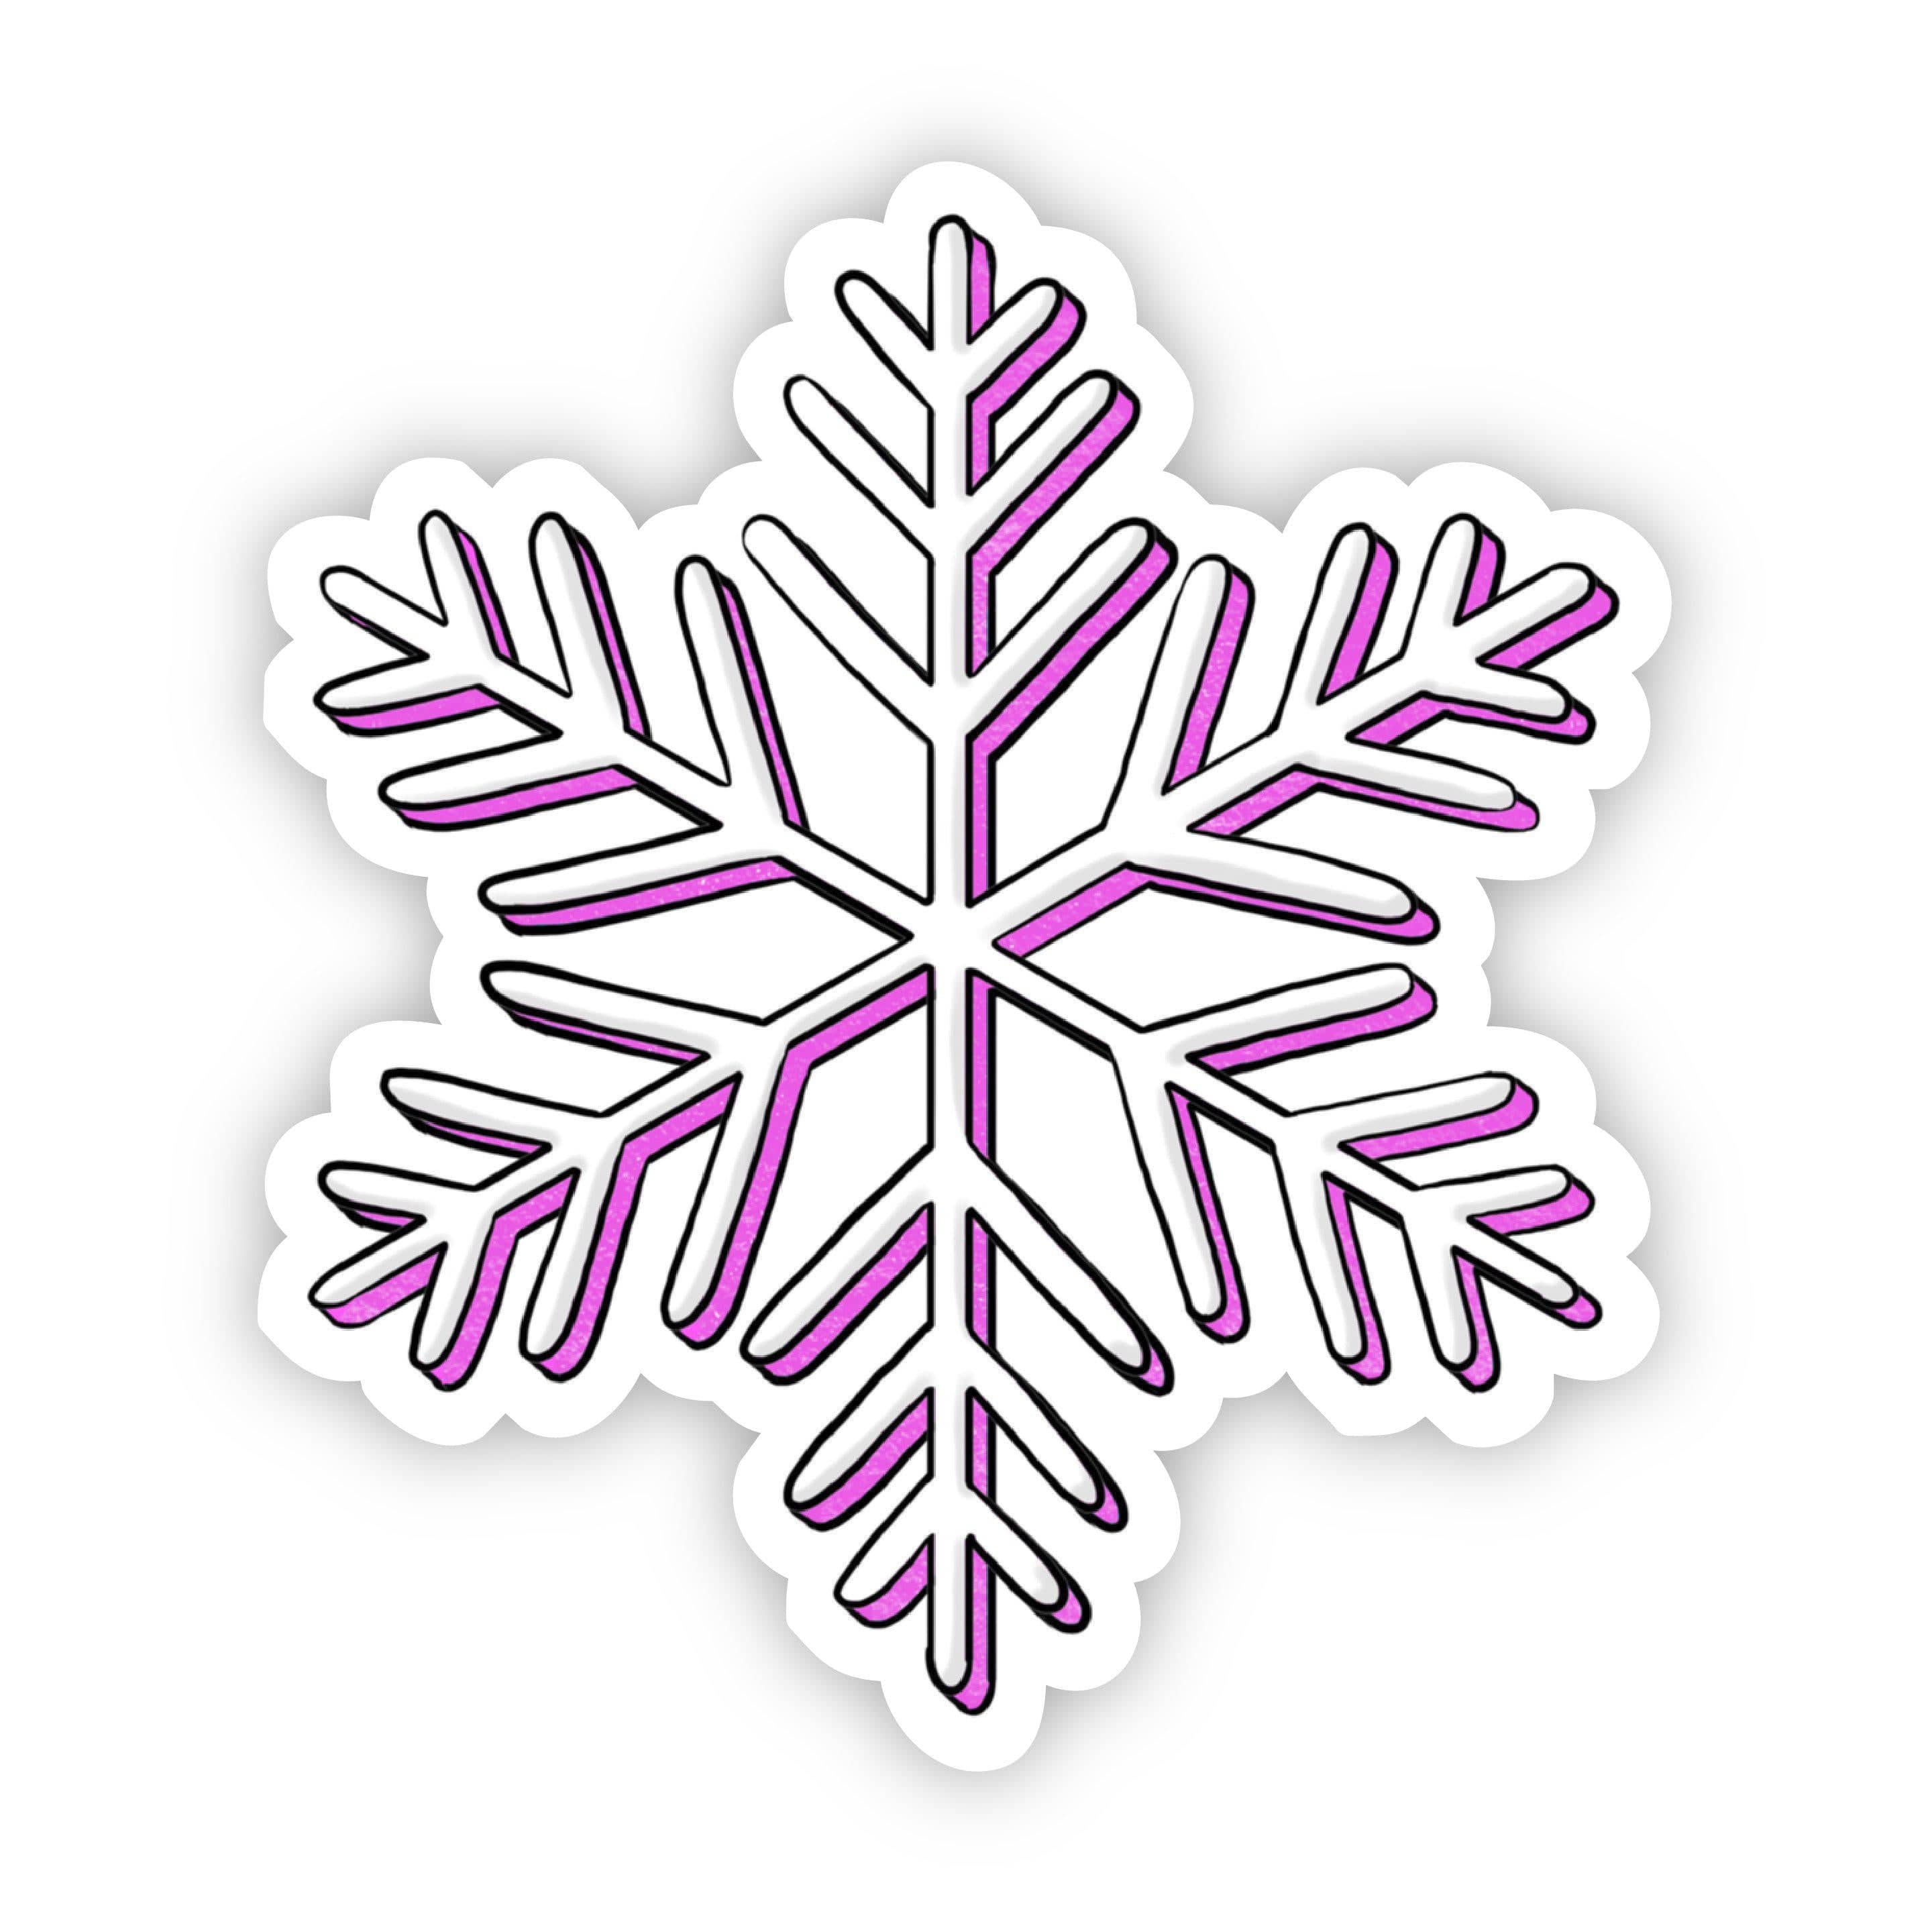 Colors of the Rainbow Snowflake Stickers